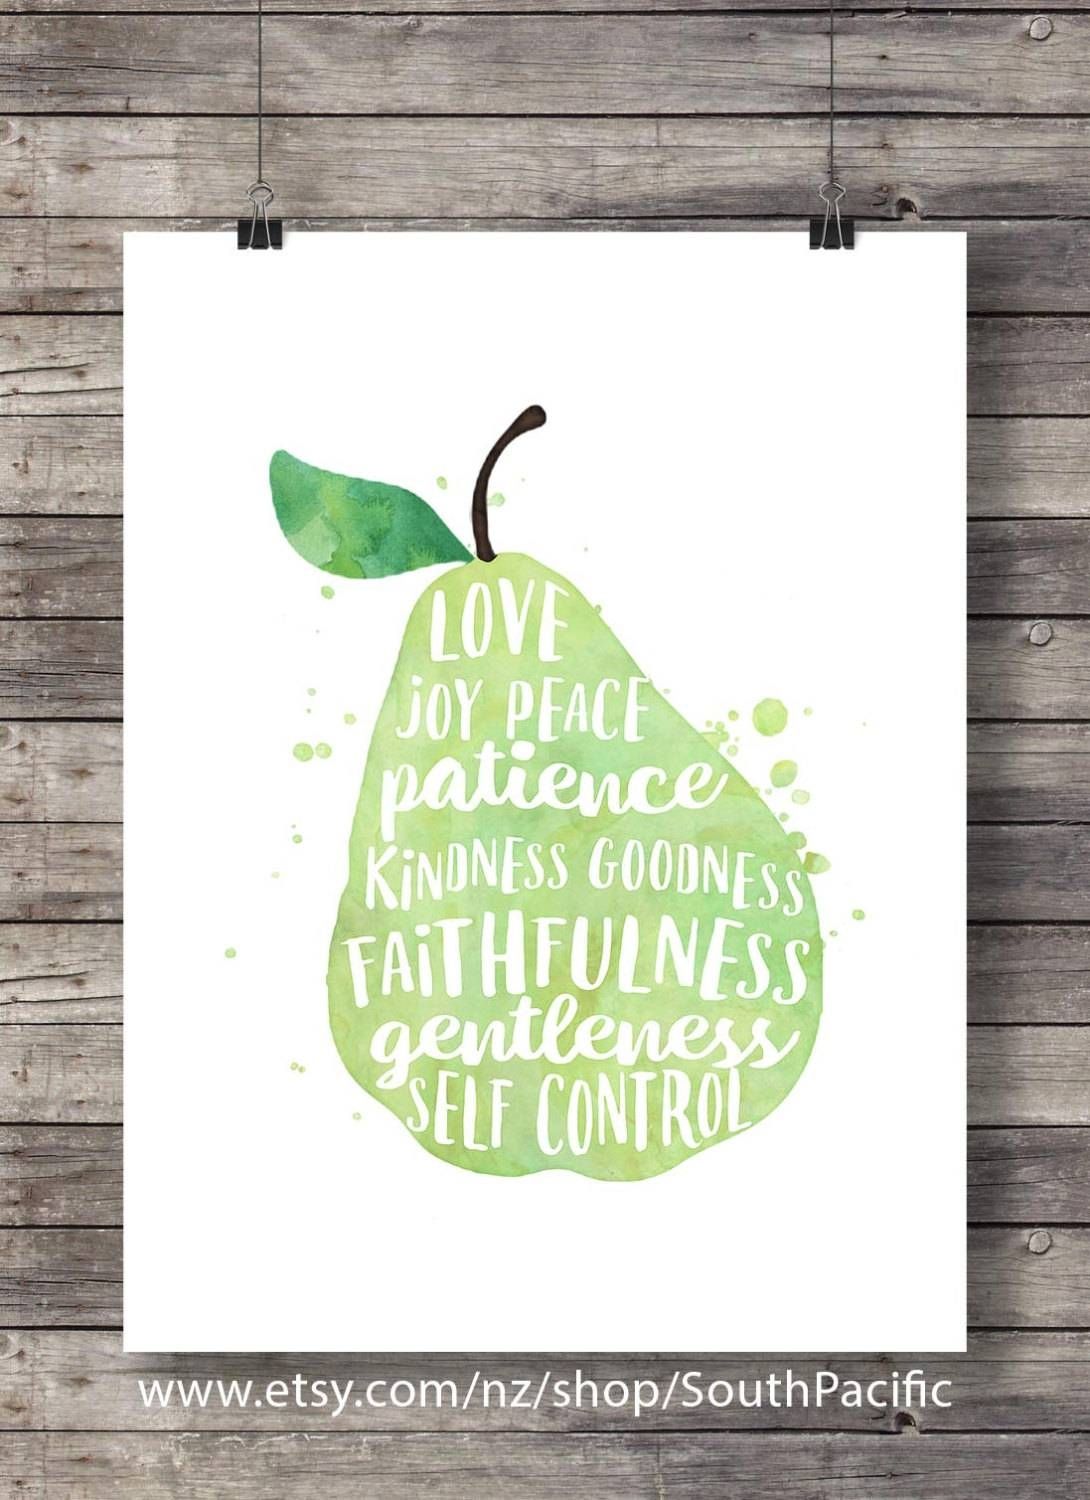 Fruit Of The Spirit Galatians 5:22 Pear Watercolor Intended For Most Recent Fruit Of The Spirit Wall Art (Gallery 18 of 30)